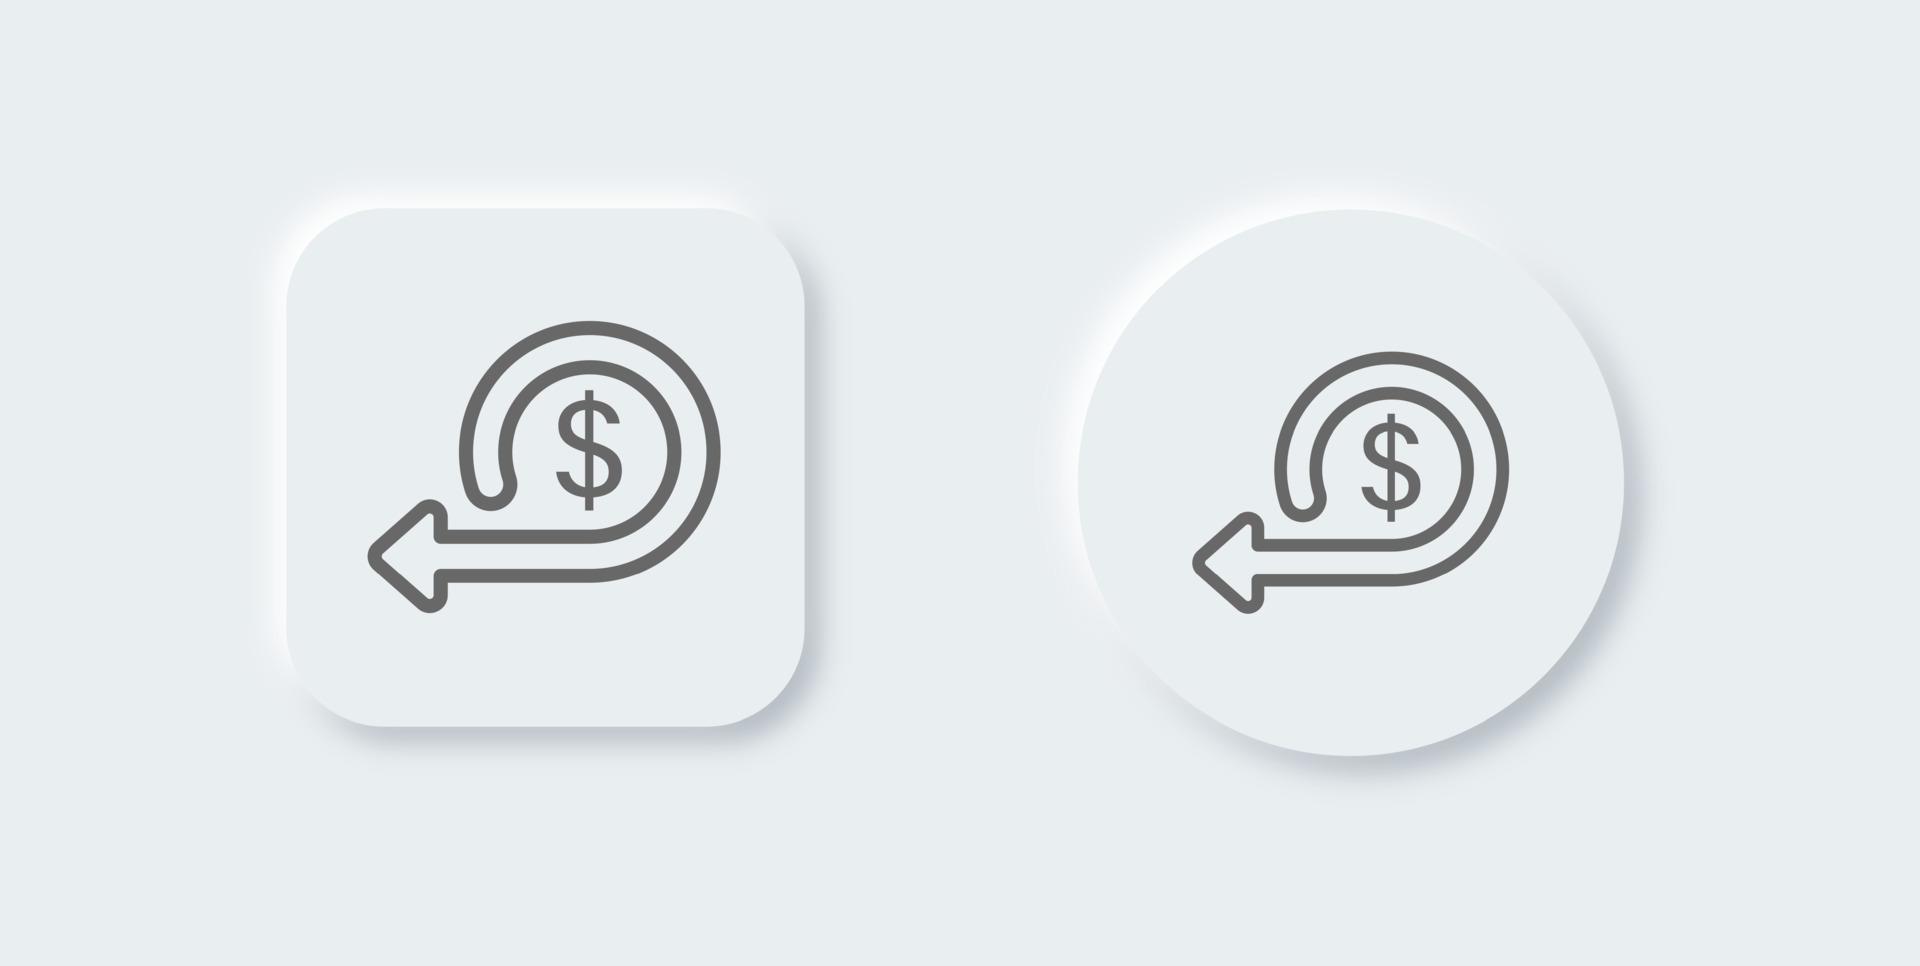 Cashback line icon in neomorphic design style. Money back signs vector illustration.